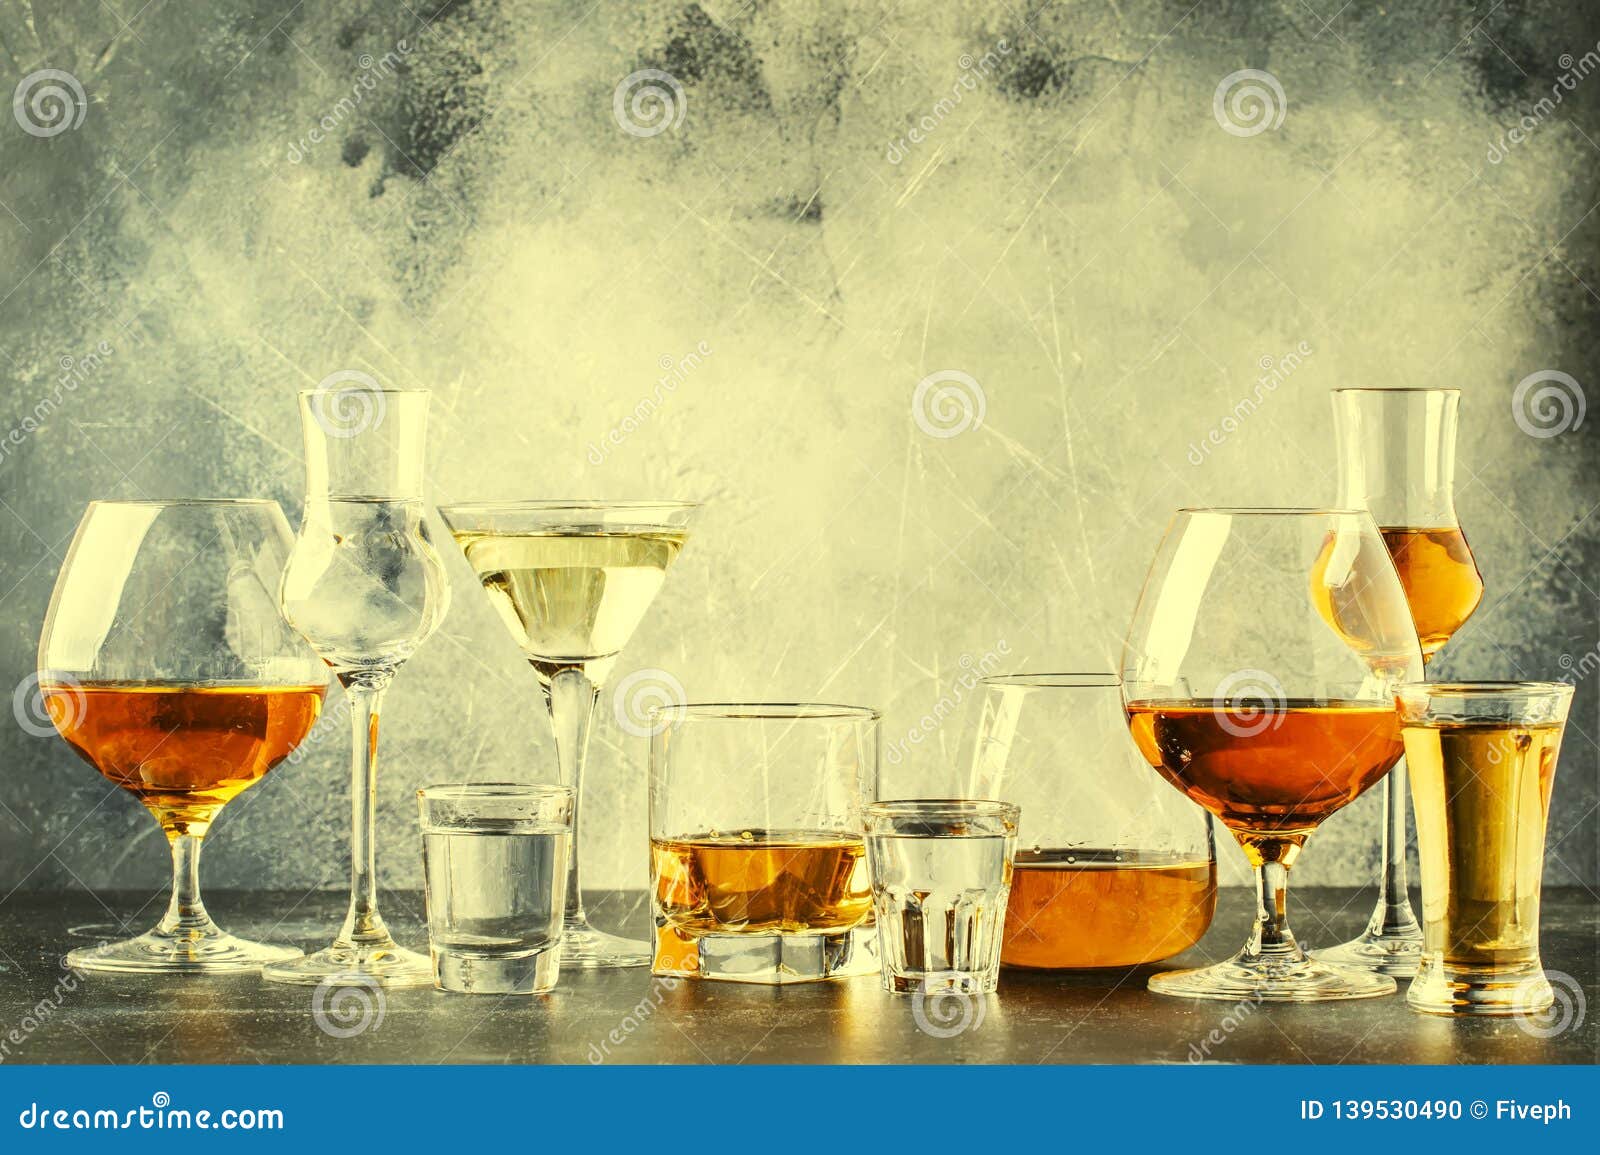 selection of hard strong alcoholic drinks in big glasses and small shot glass in assortent: vodka, cognac, tequila, brandy and